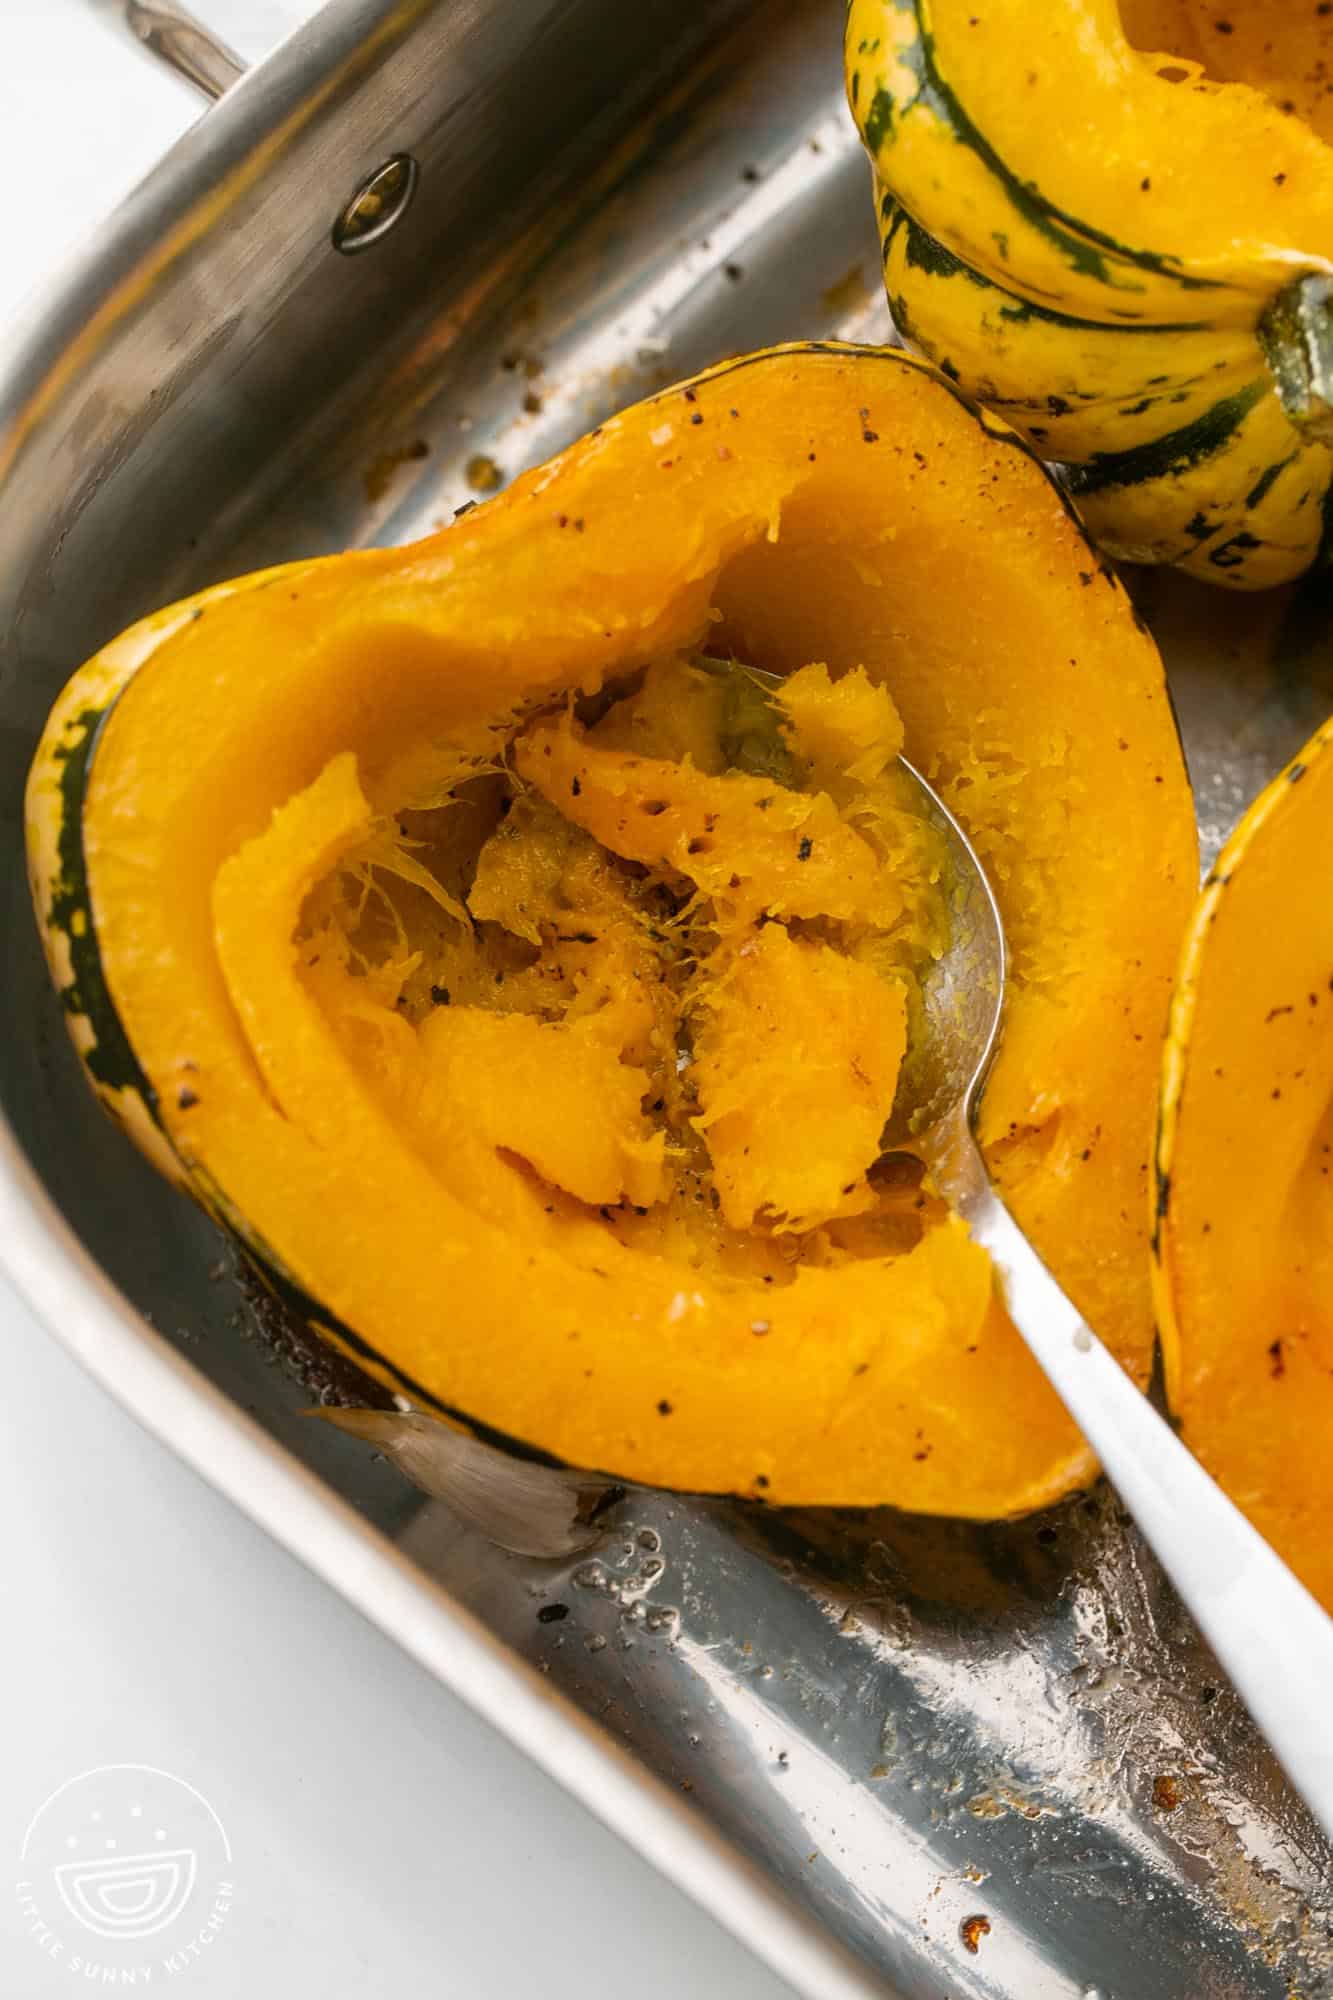 Scooping out the flesh or a roasted acorn squash with a spoon